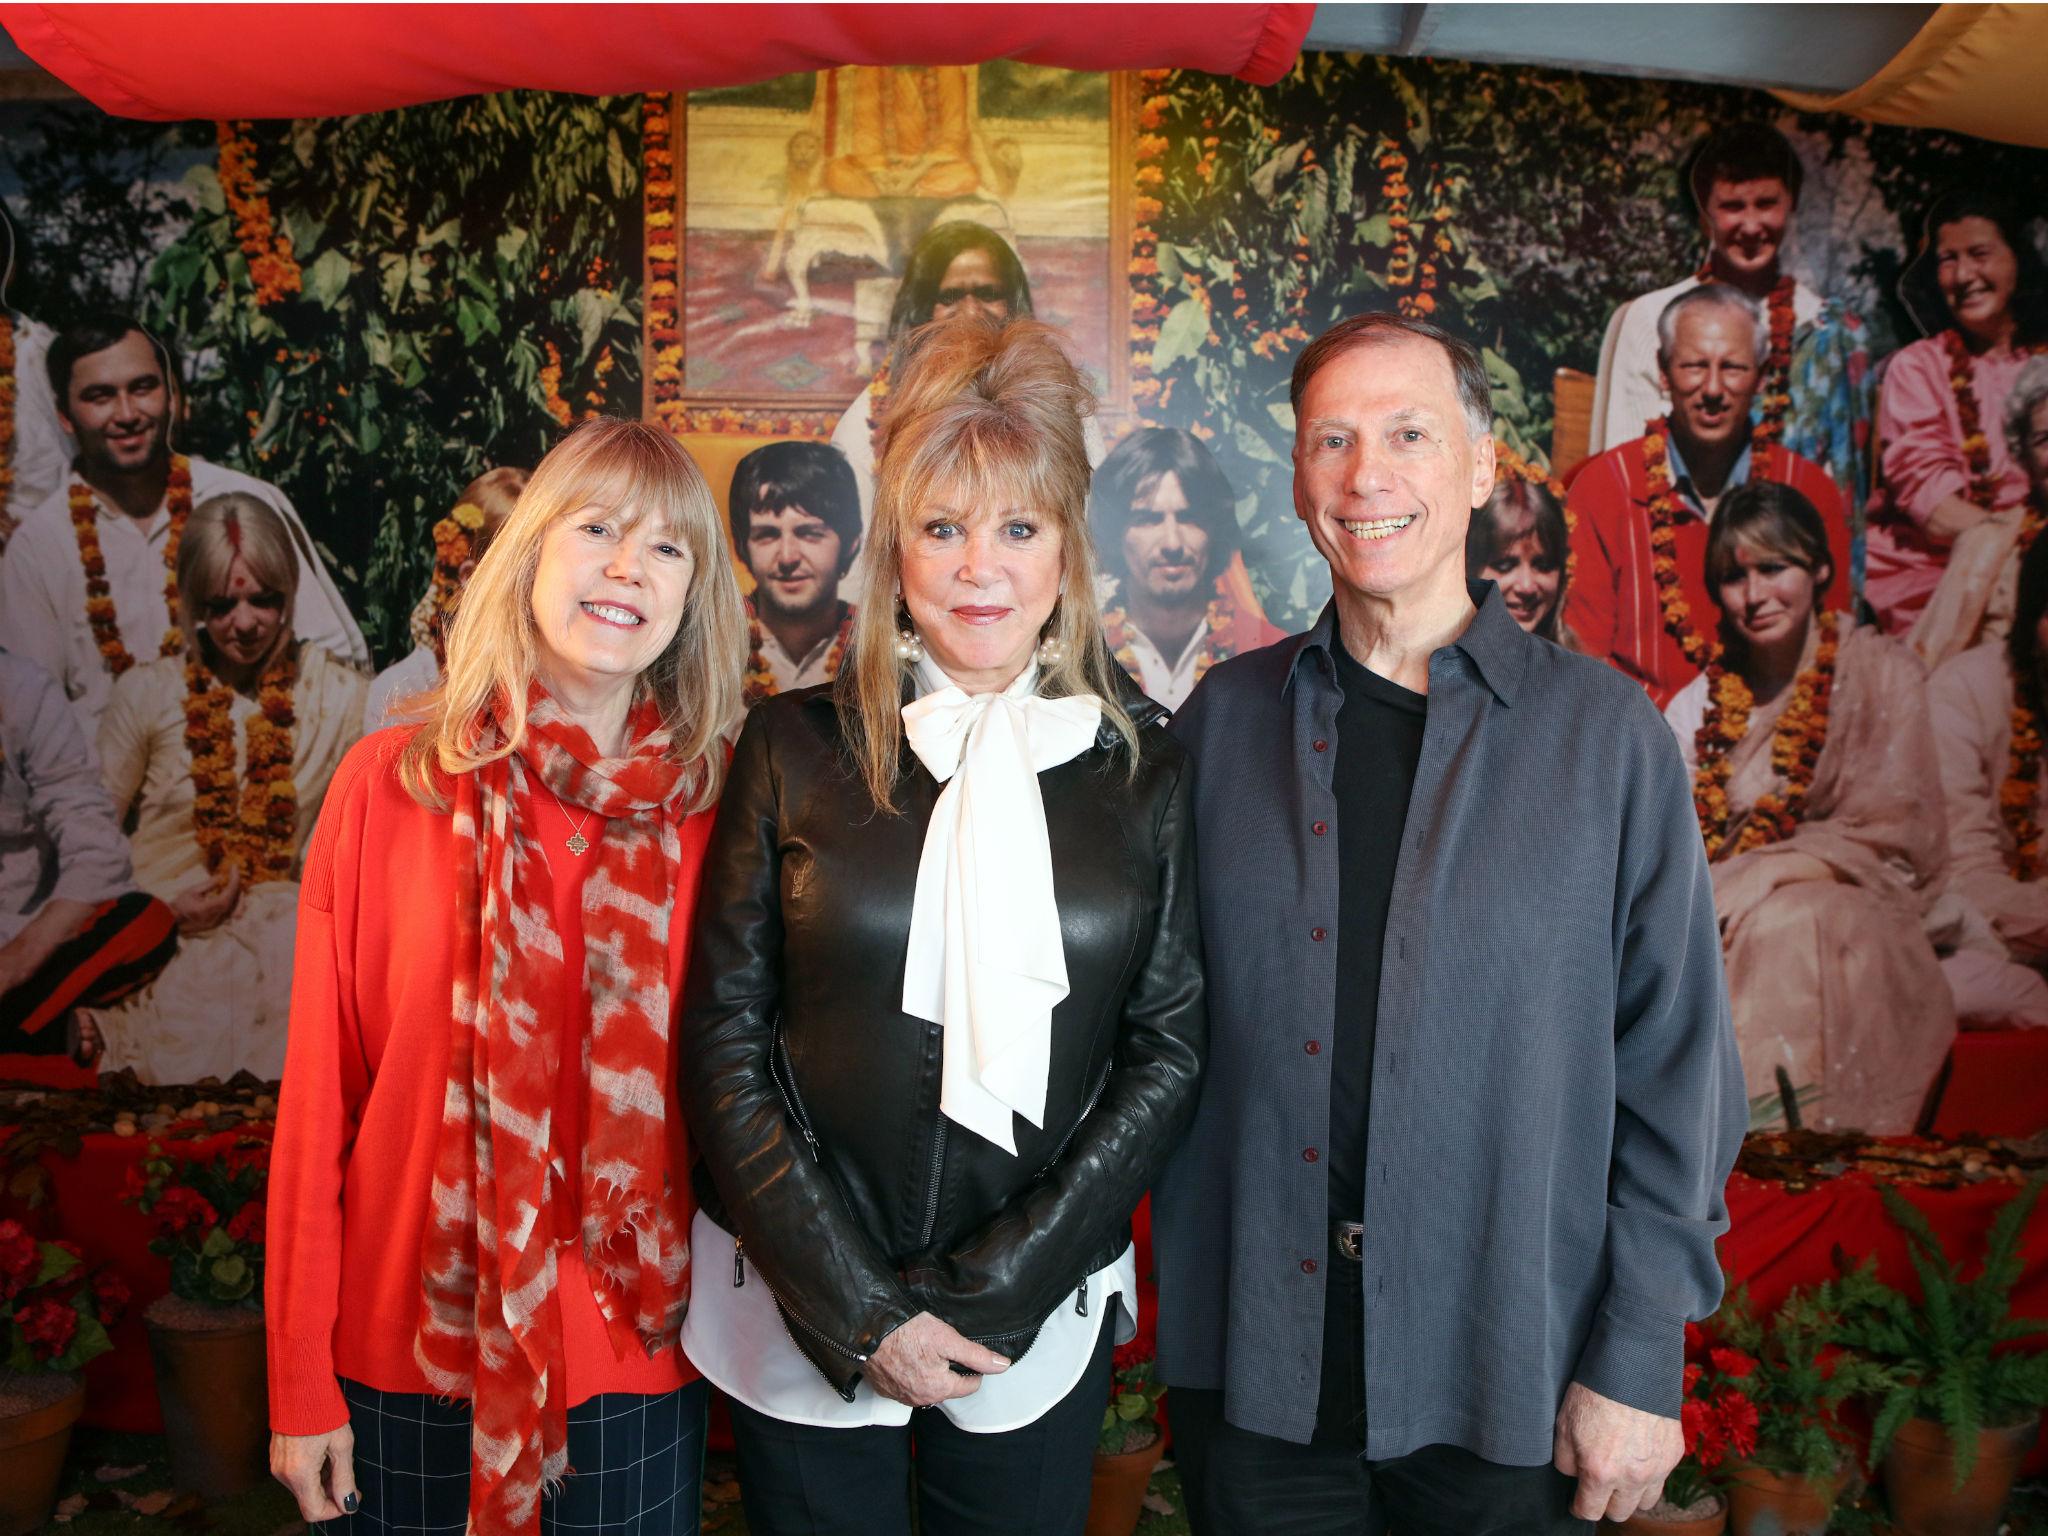 George Harrison’s former wife Pattie Boyd (centre), her sister Jenny and filmmaker Paul Saltzman share their memories of the trip at the opening of the exhibition in Liverpool